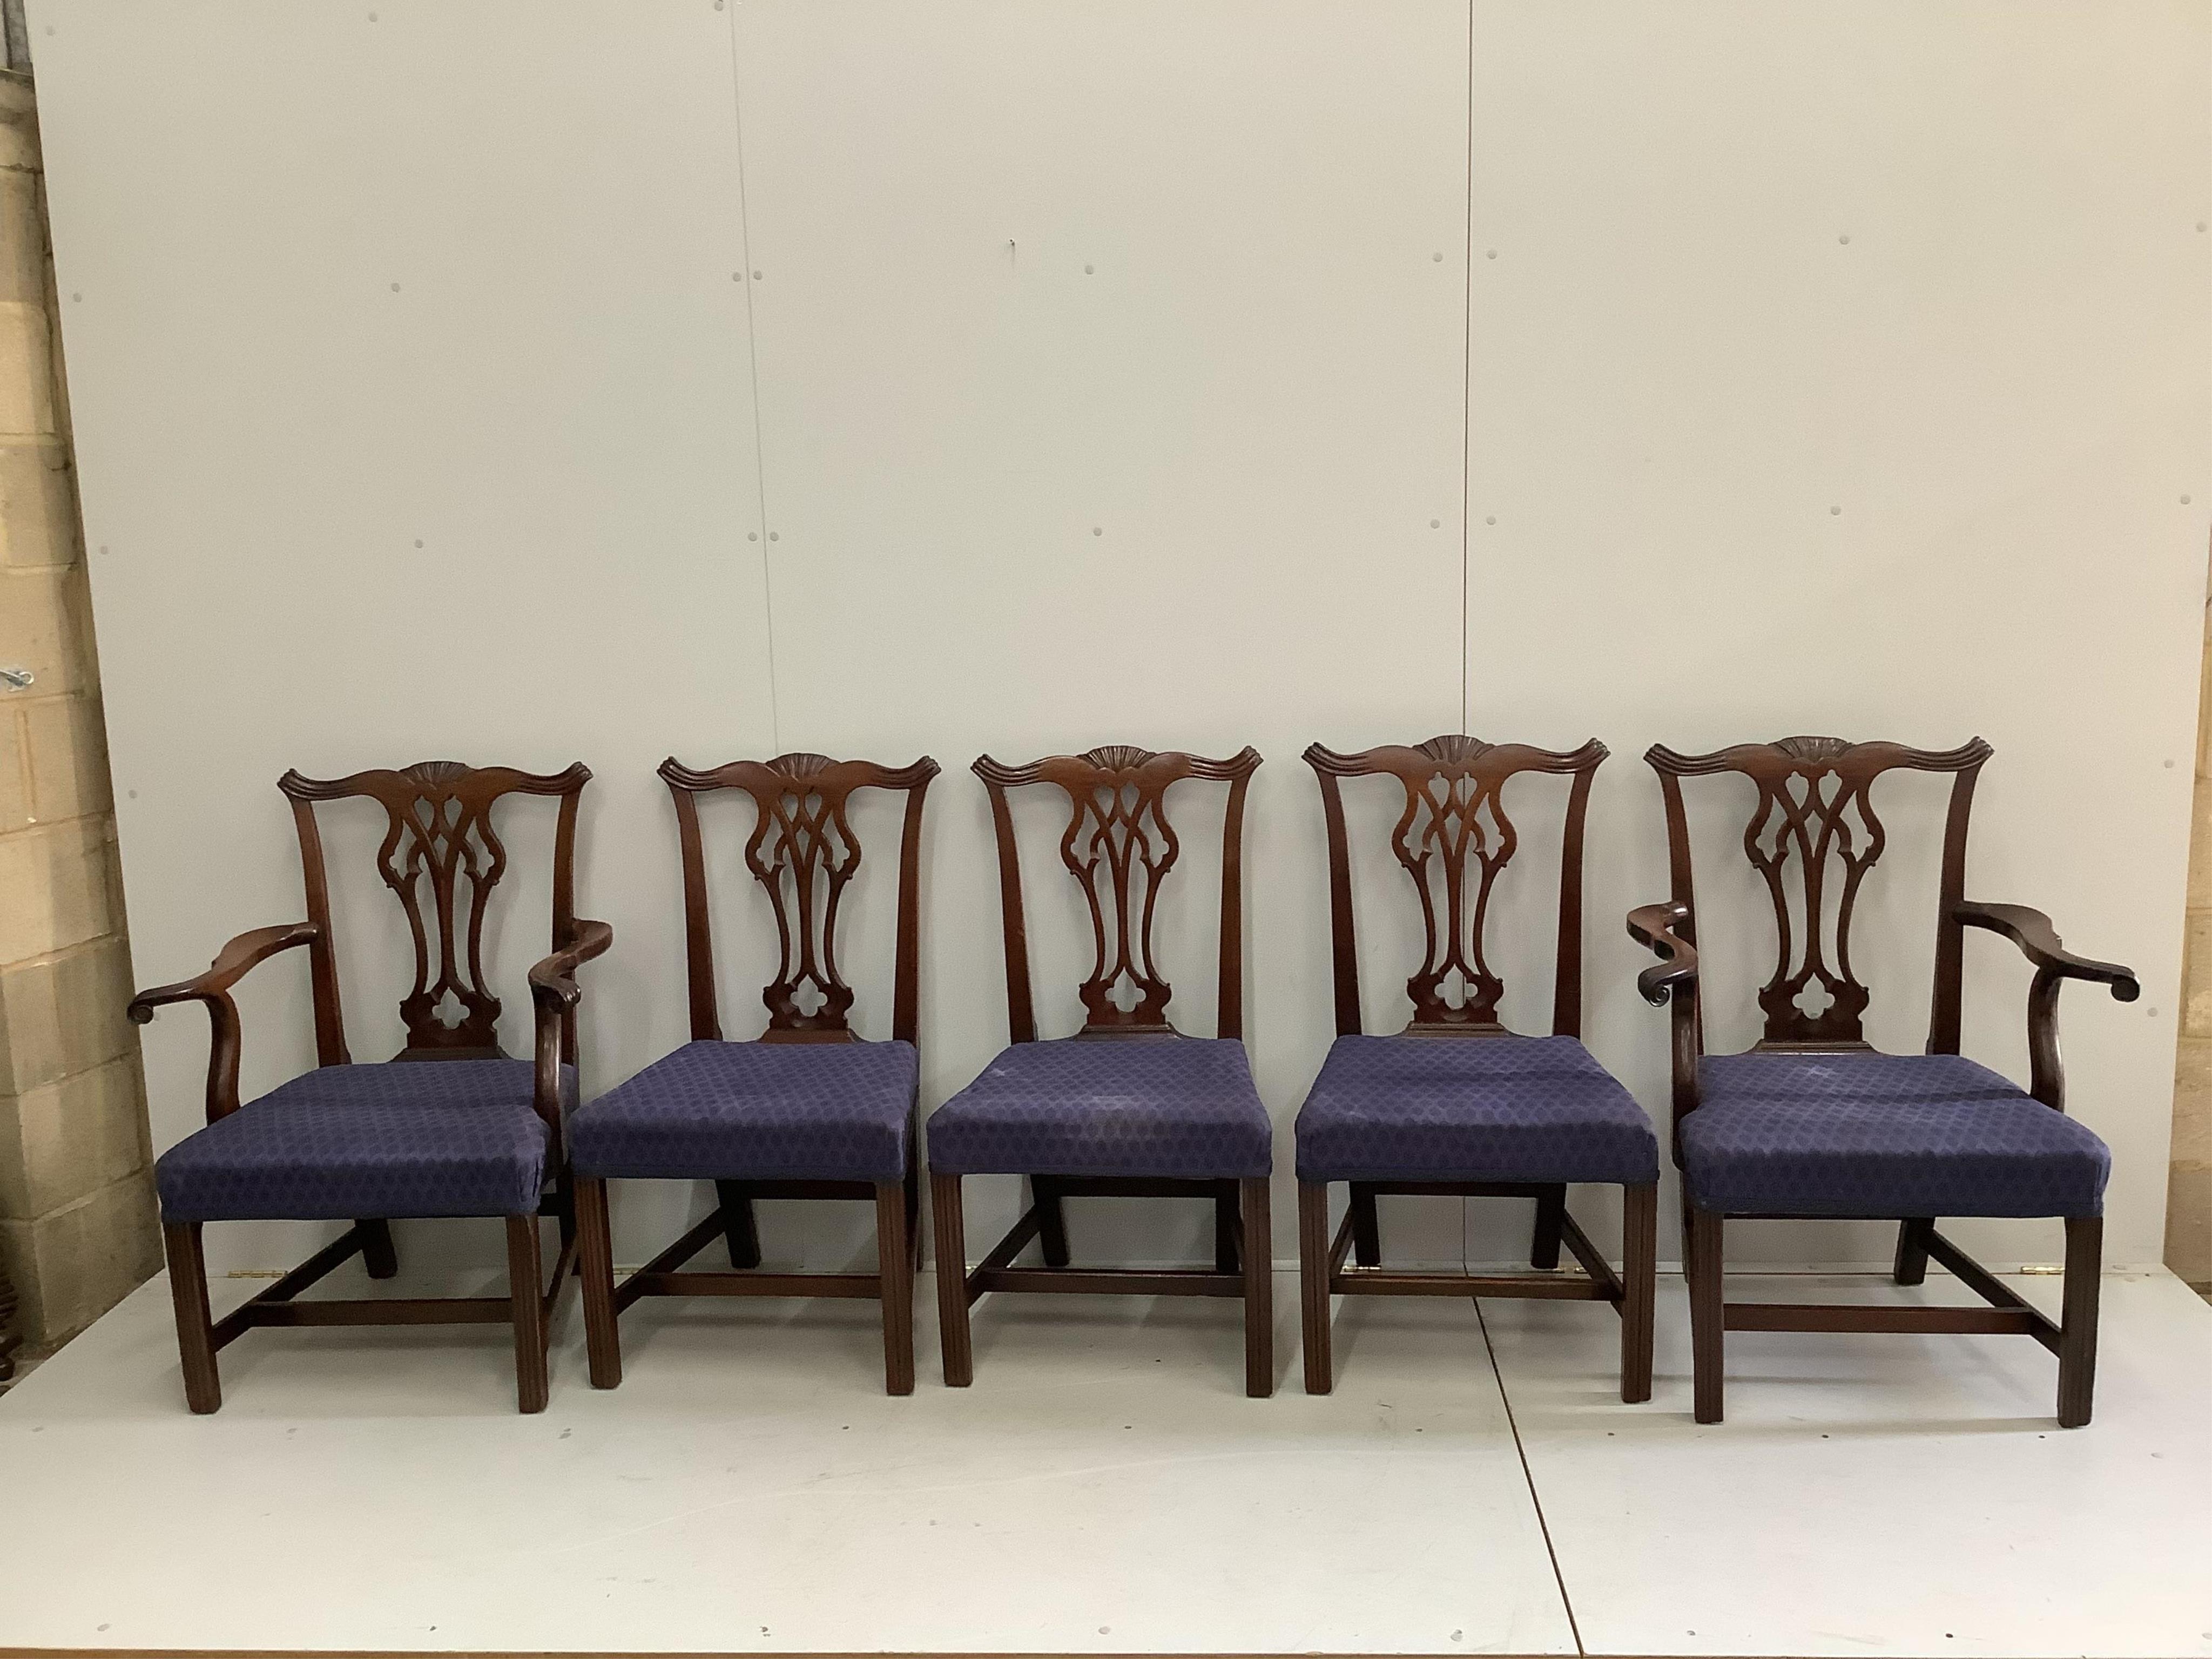 A set of ten Chippendale Revival dining chairs, two with arms. Condition - good